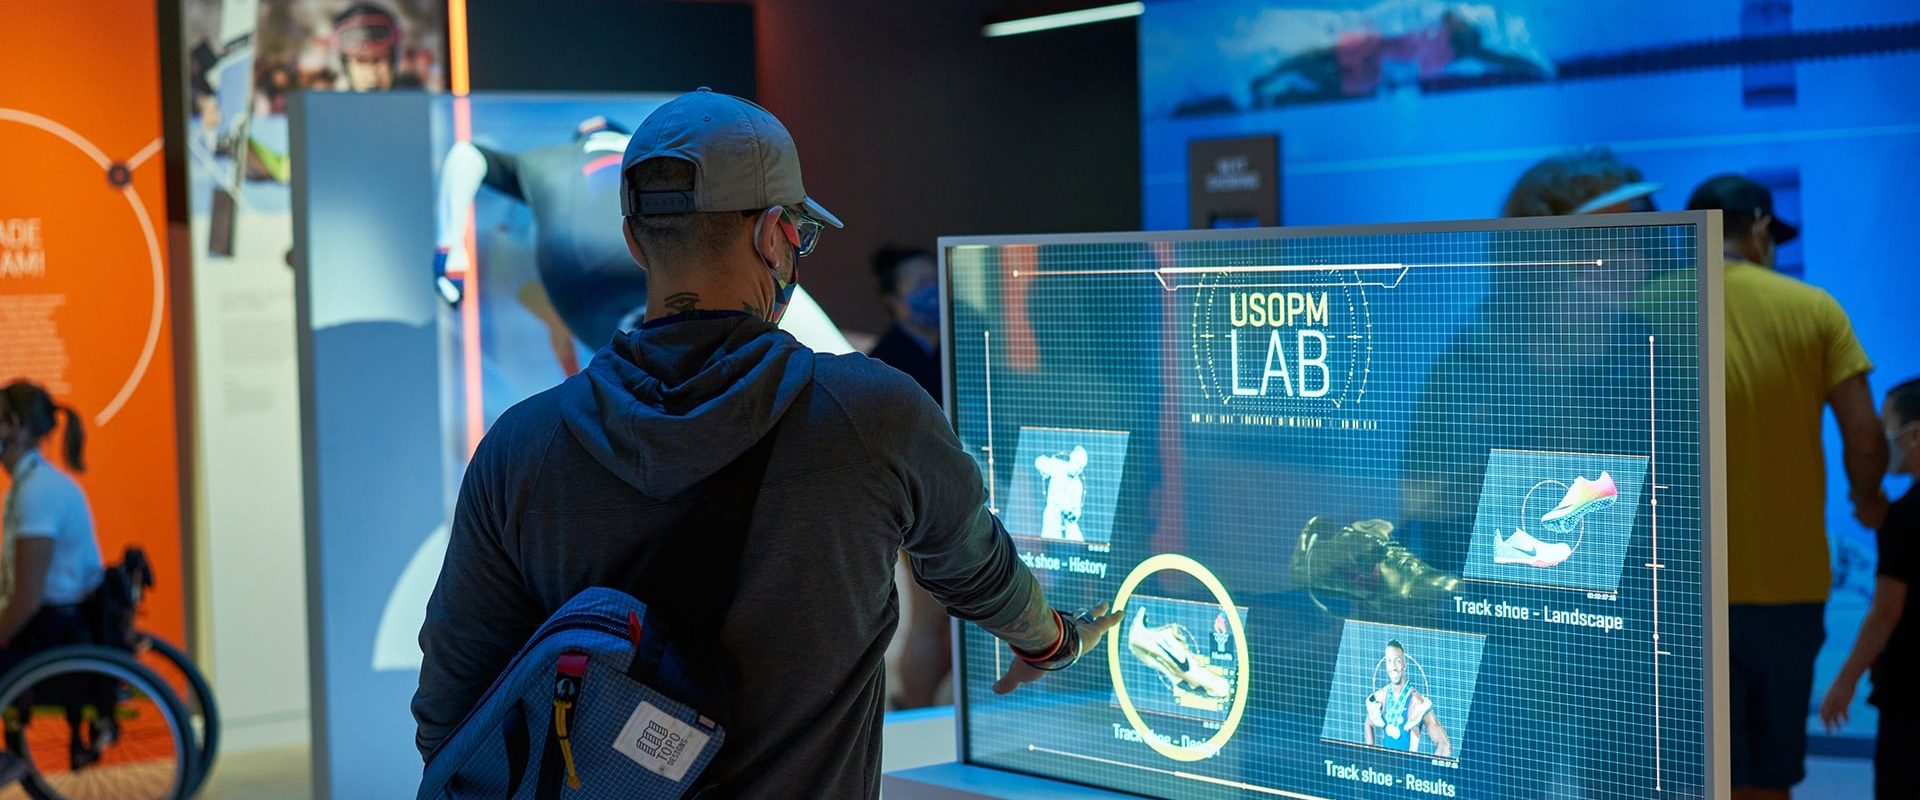 A guest interacts with an exhibit in The Lab